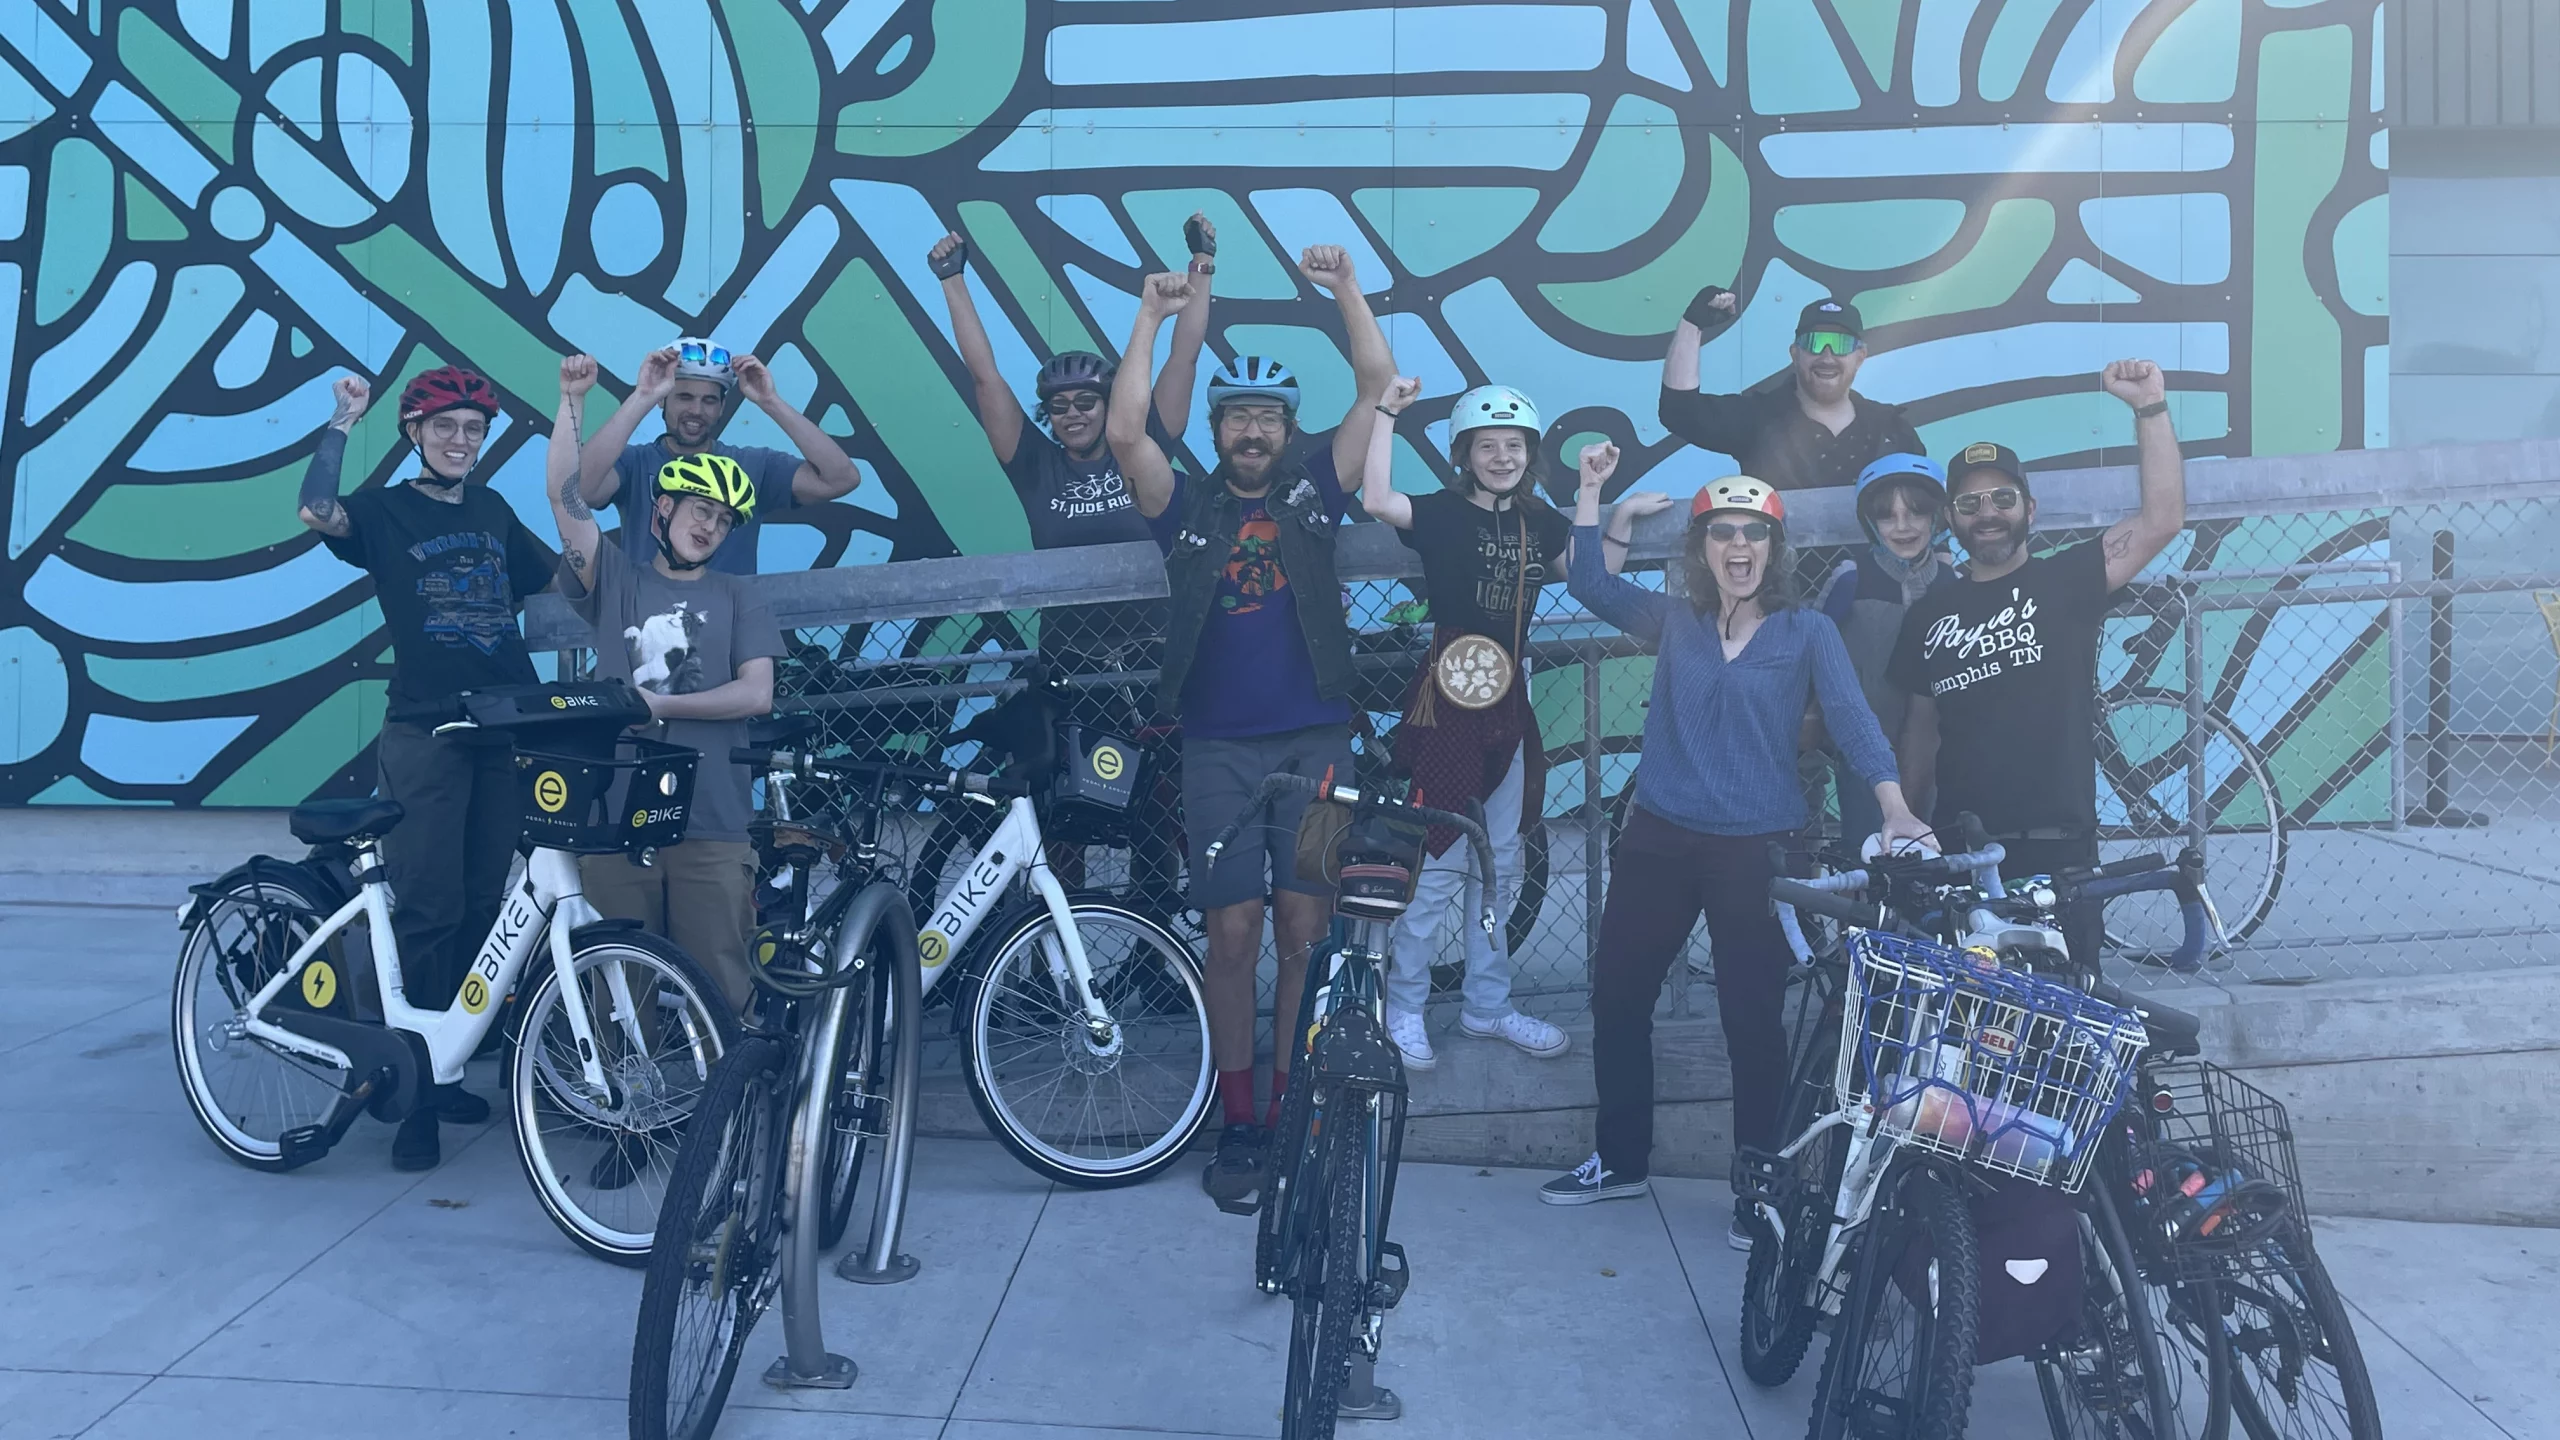 Group of people on bicycles promoting bicycling in Memphis